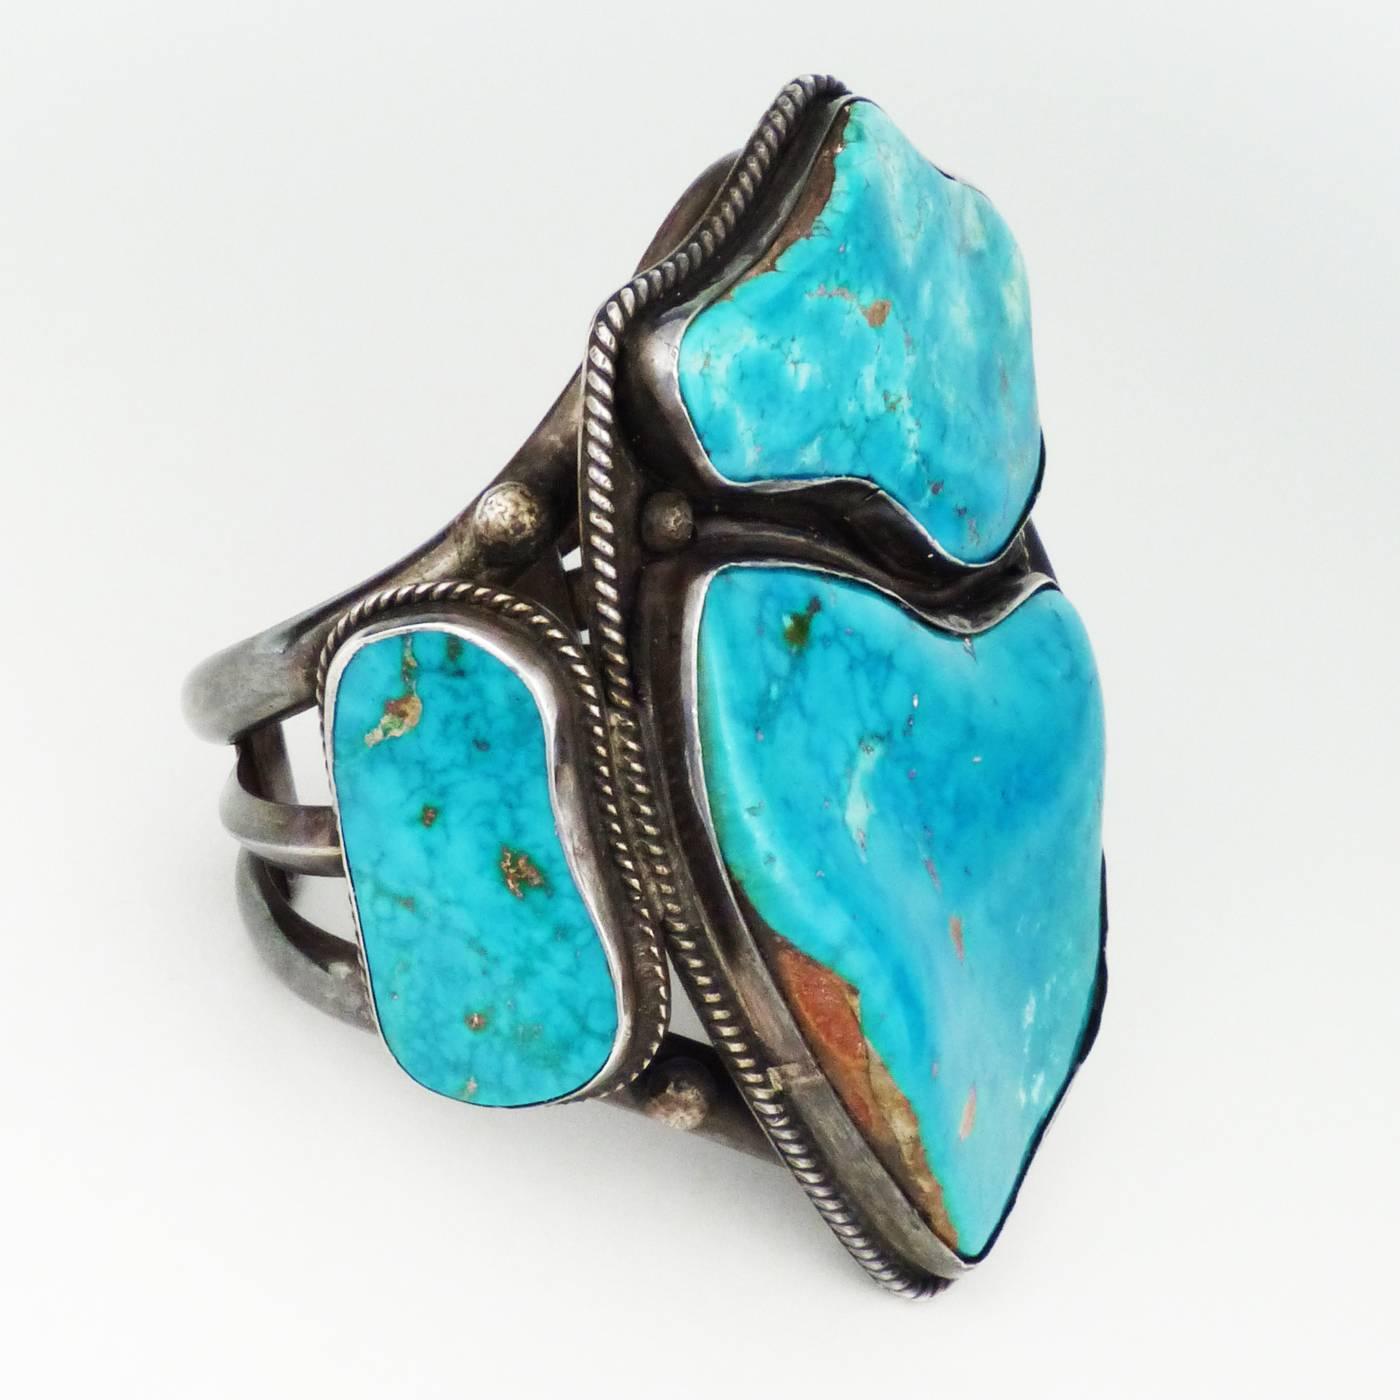 Exquisite blue gem turquoise and silver cuff by one of the master Navajo jewelers. This bracelet is clearly hallmarked on the back. Measures: 5 5/8